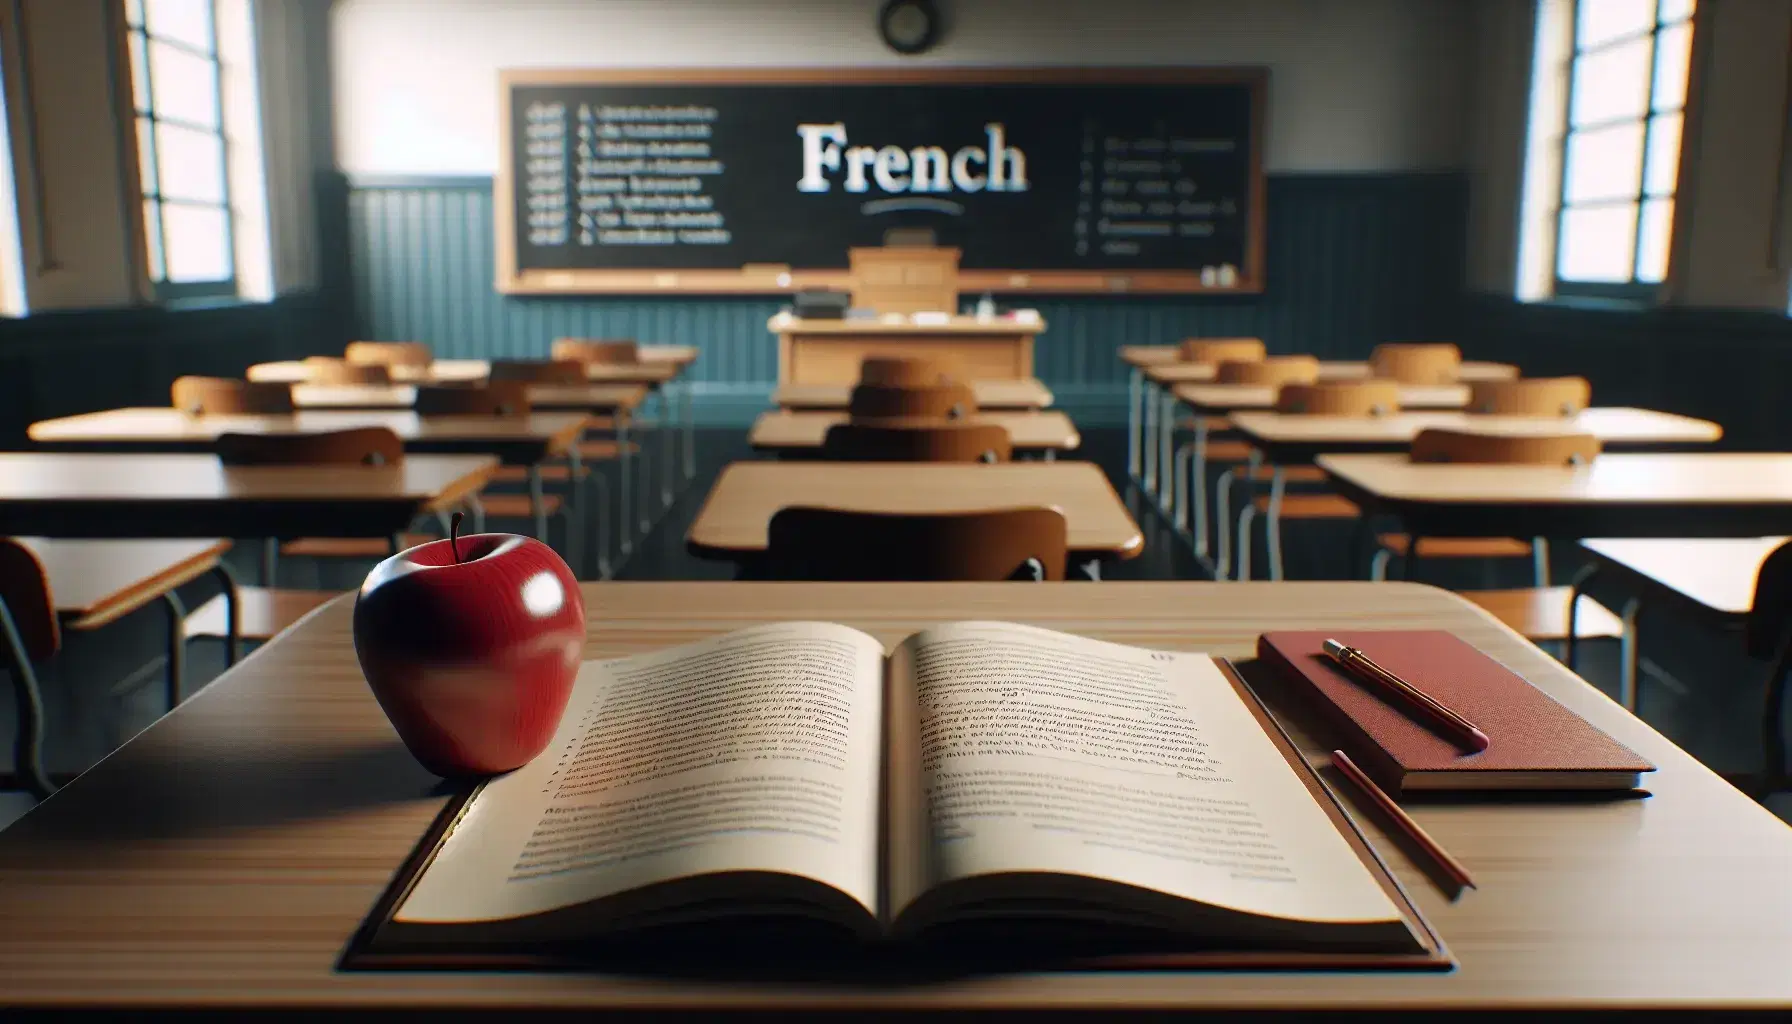 French language classroom with teacher's desk, open textbook, red apple, clean chalkboard, student desks with notebooks and pencils, and sunlit windows with white curtains.